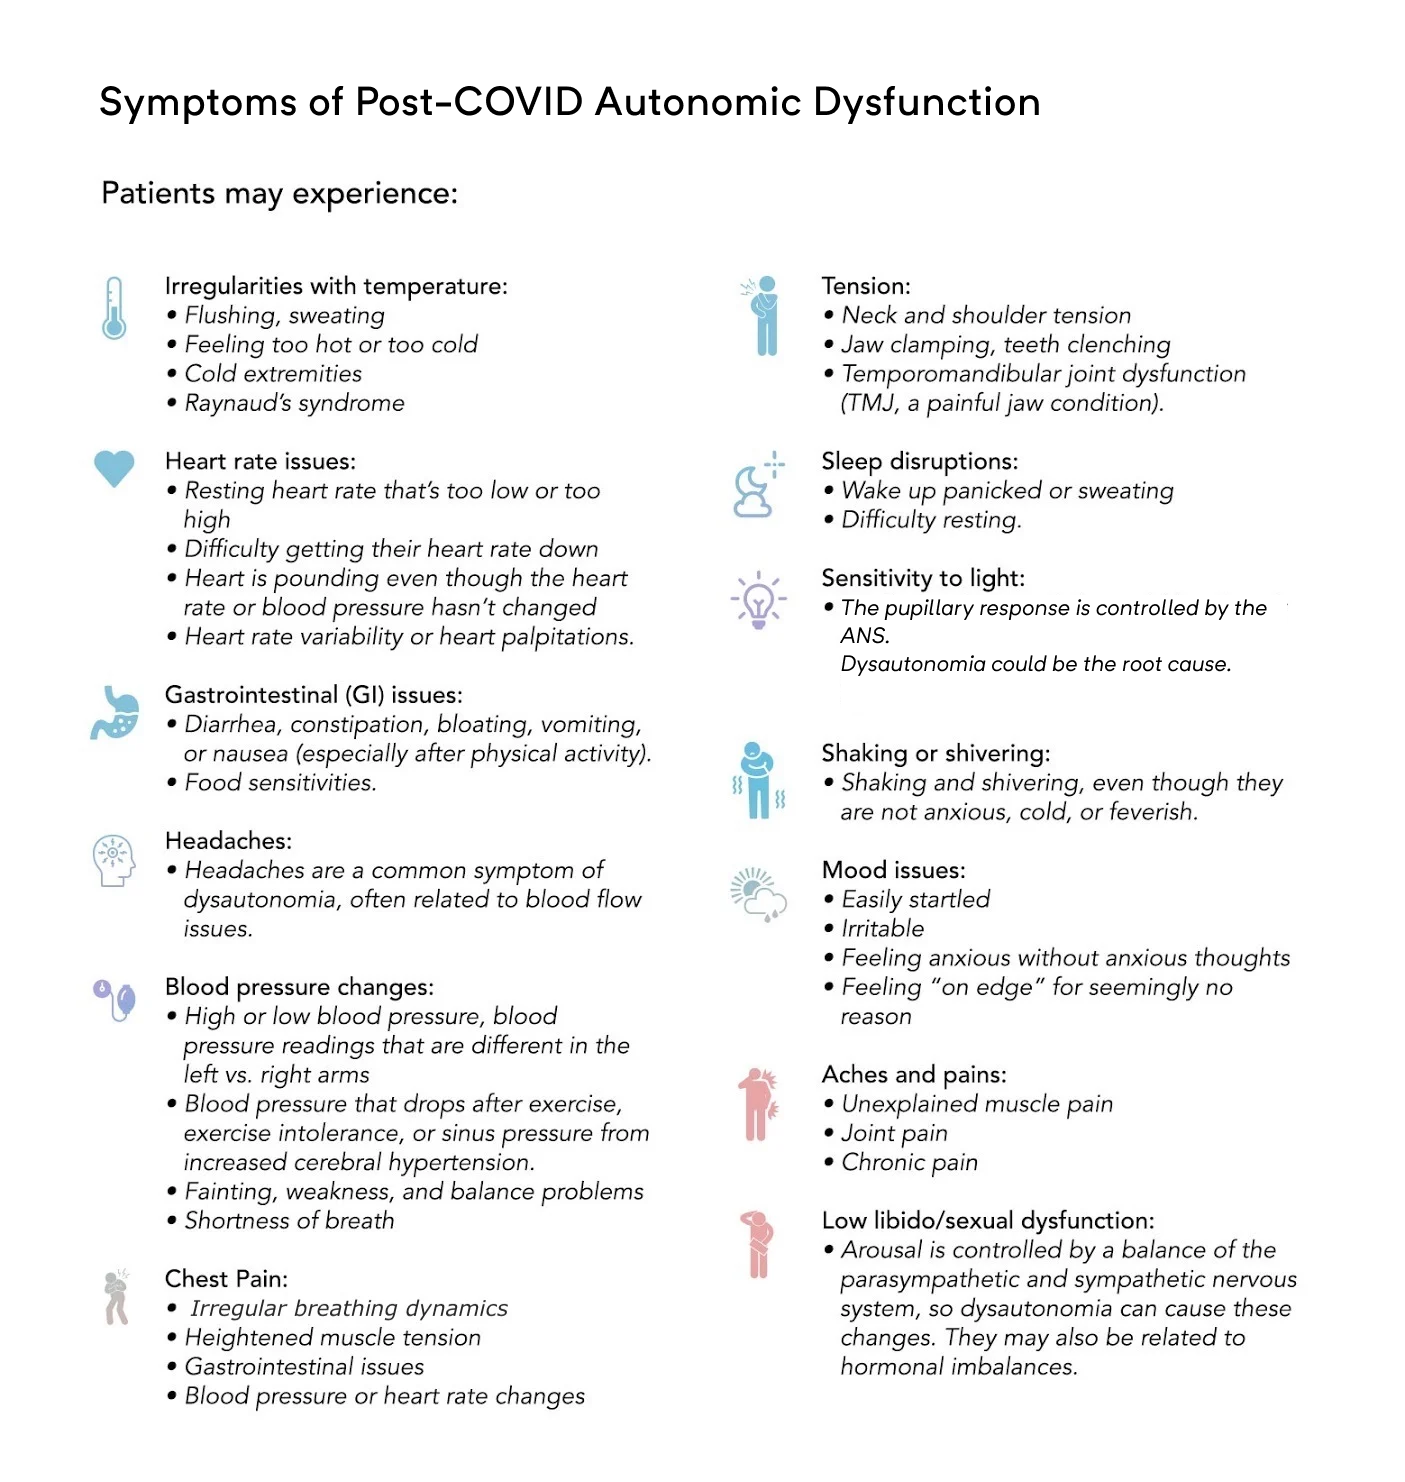 COVID-19 can cause many symptoms of POTS or dysautonomia; fortunately, many of them are treatable.